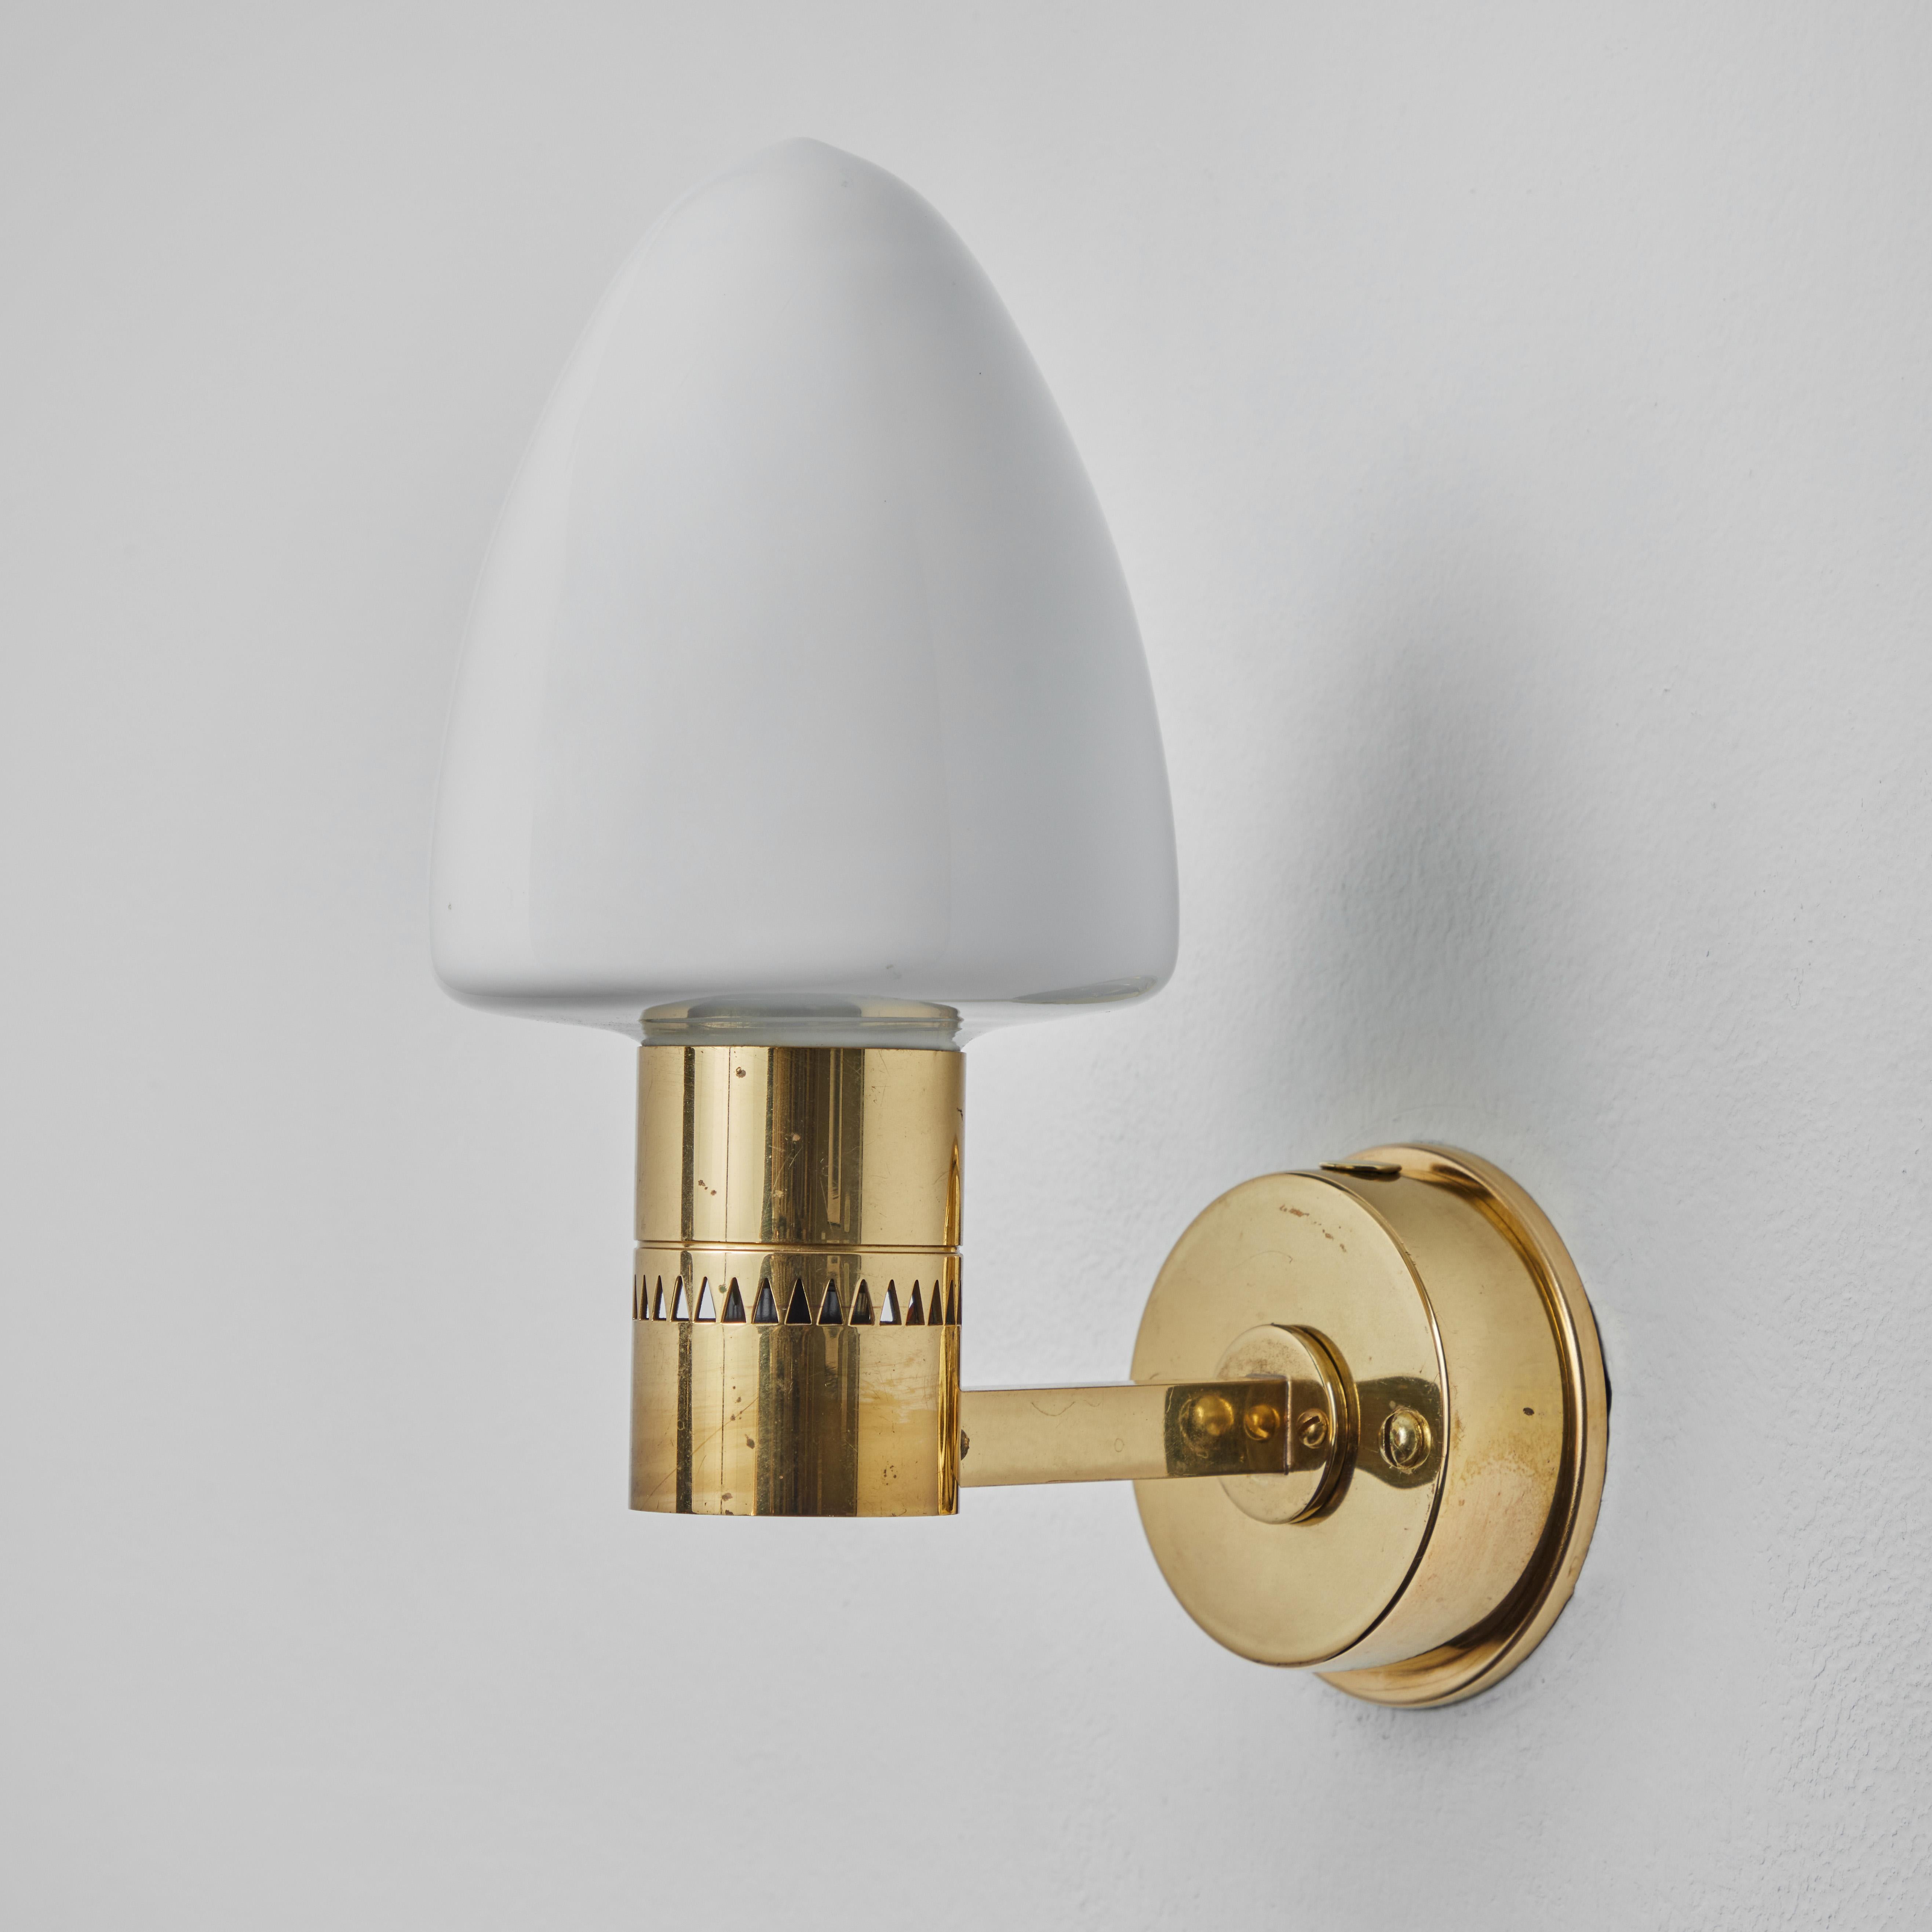 Pair of 1960s Hans-Agne Jakobsson Model V-220 brass & glass sconces for Markaryd. An incredibly refined vintage design that is quintessentially Swedish. Executed in sculpturally bent brass and blown opaline glass.

Price is for the pair.

Rewired